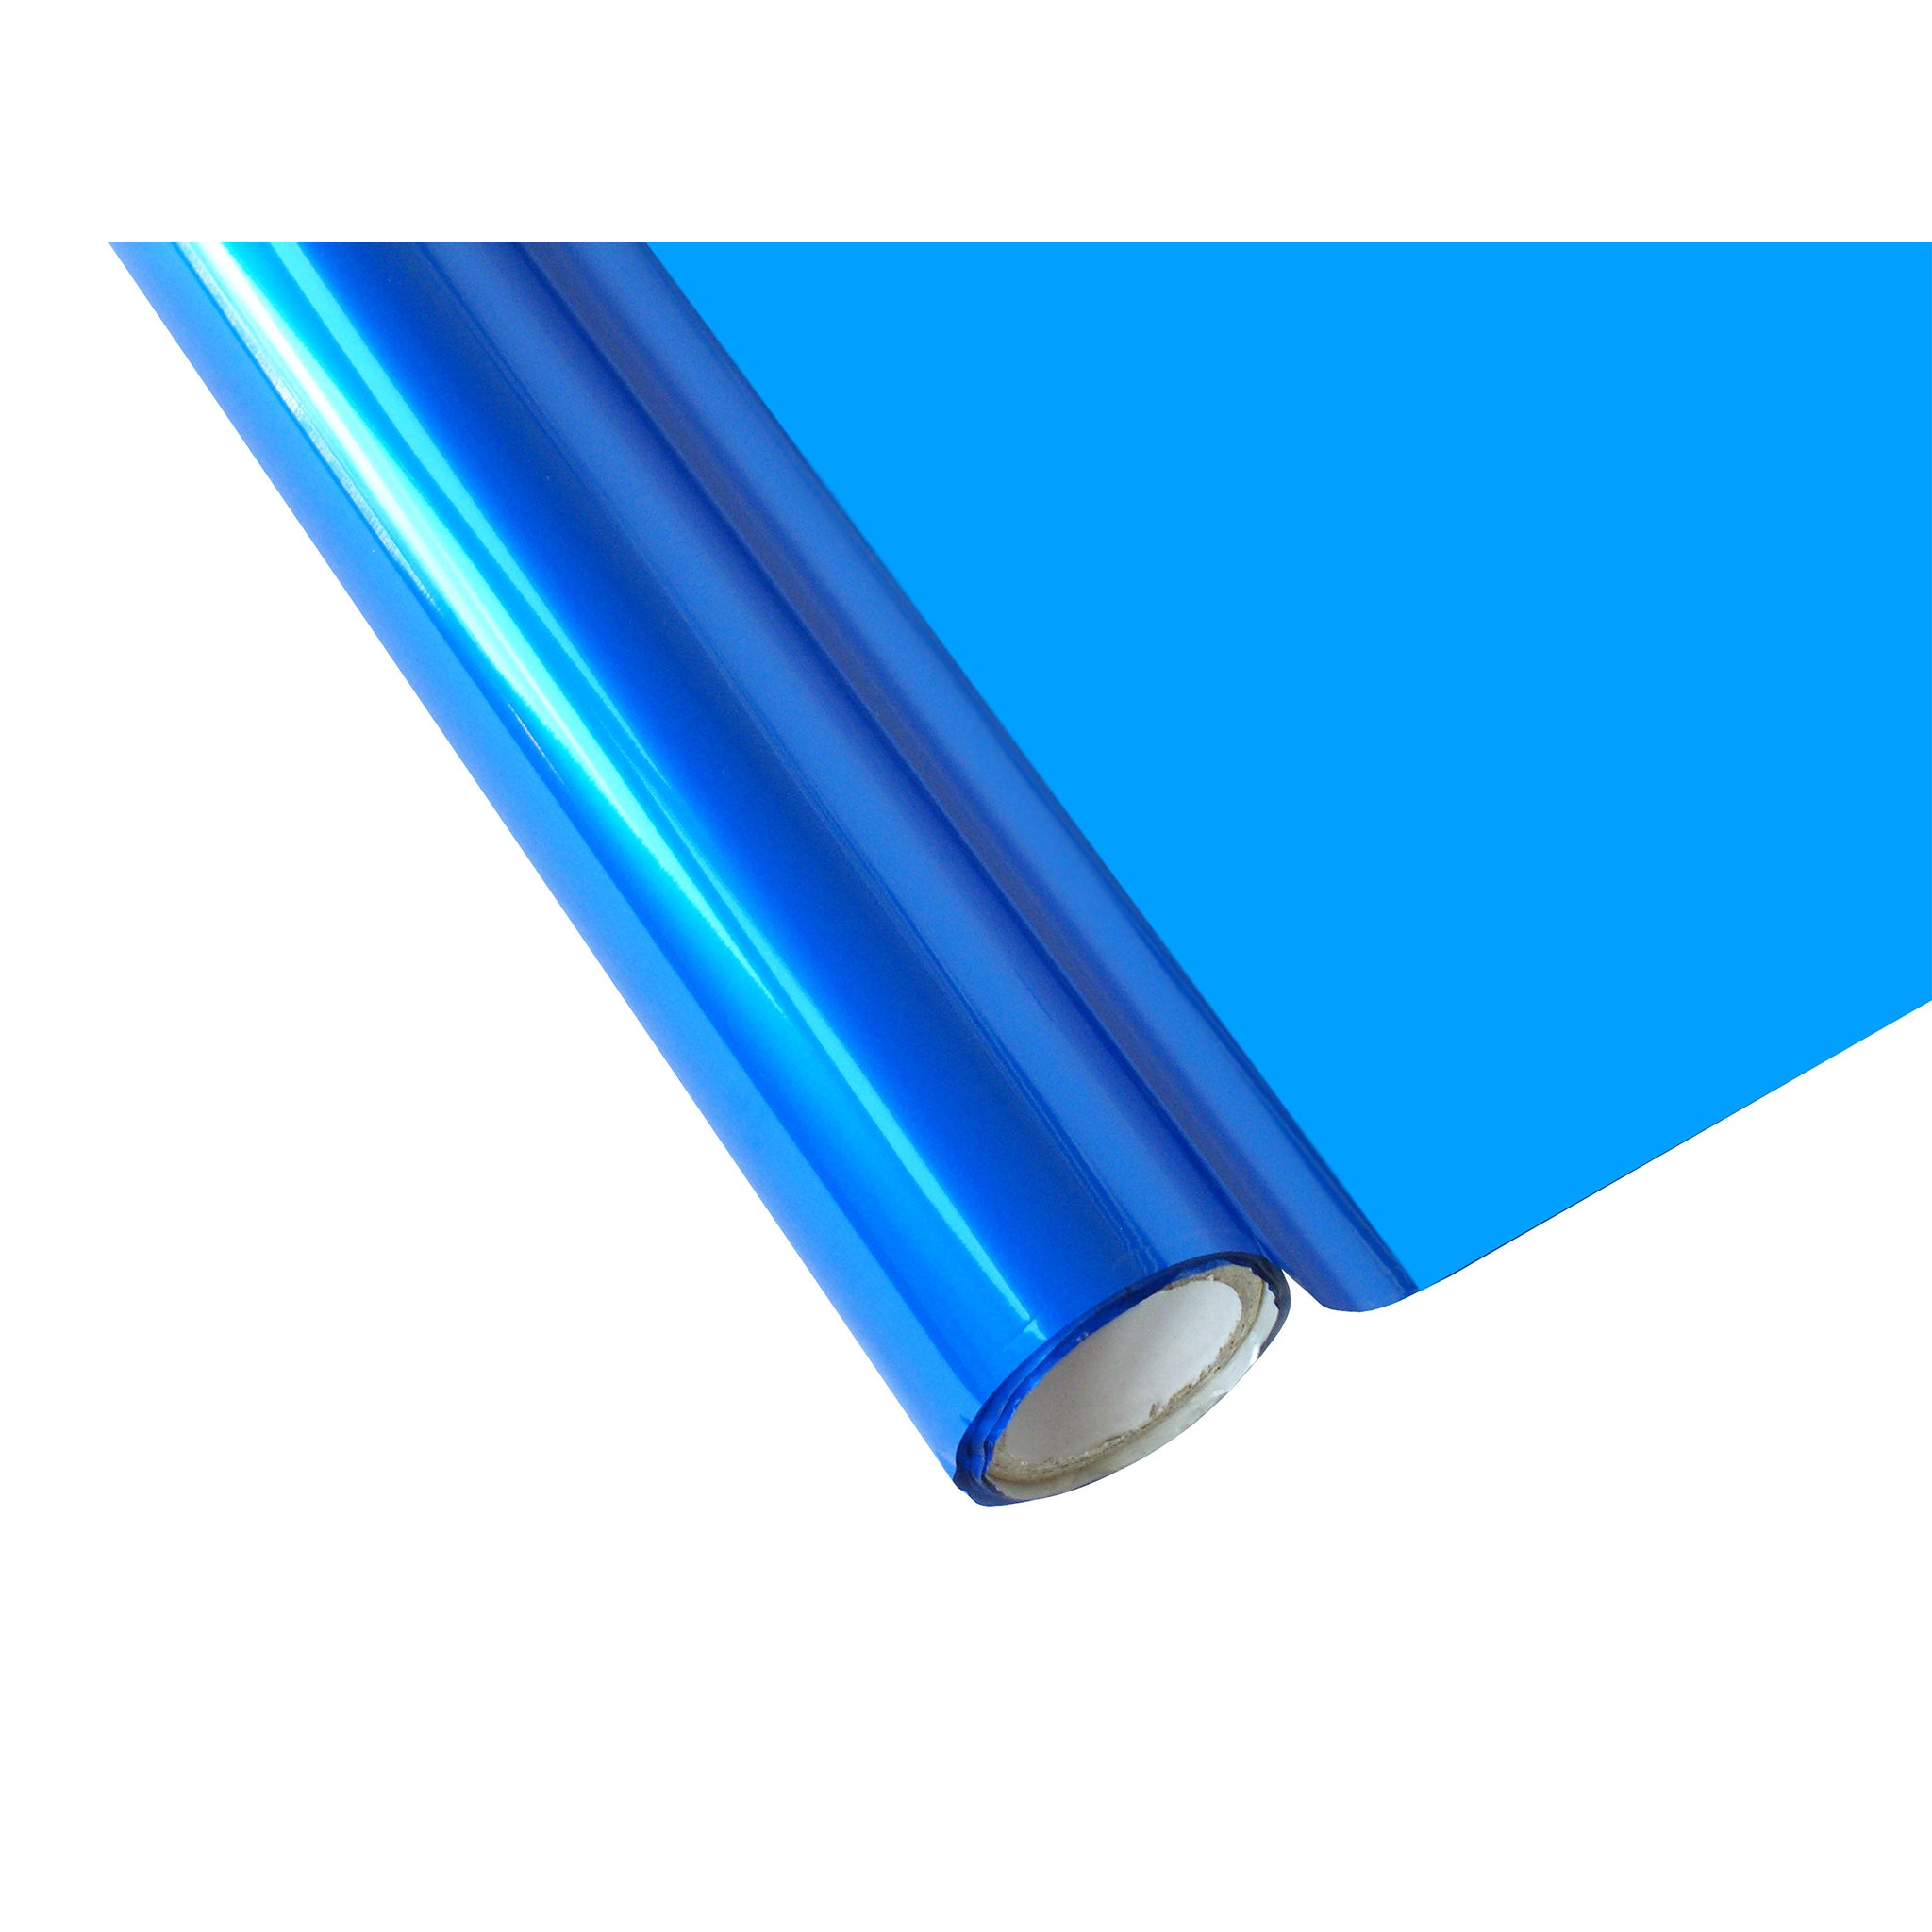 25 Foot Roll of 12" StarCraft Electra Foil - Royal Blue